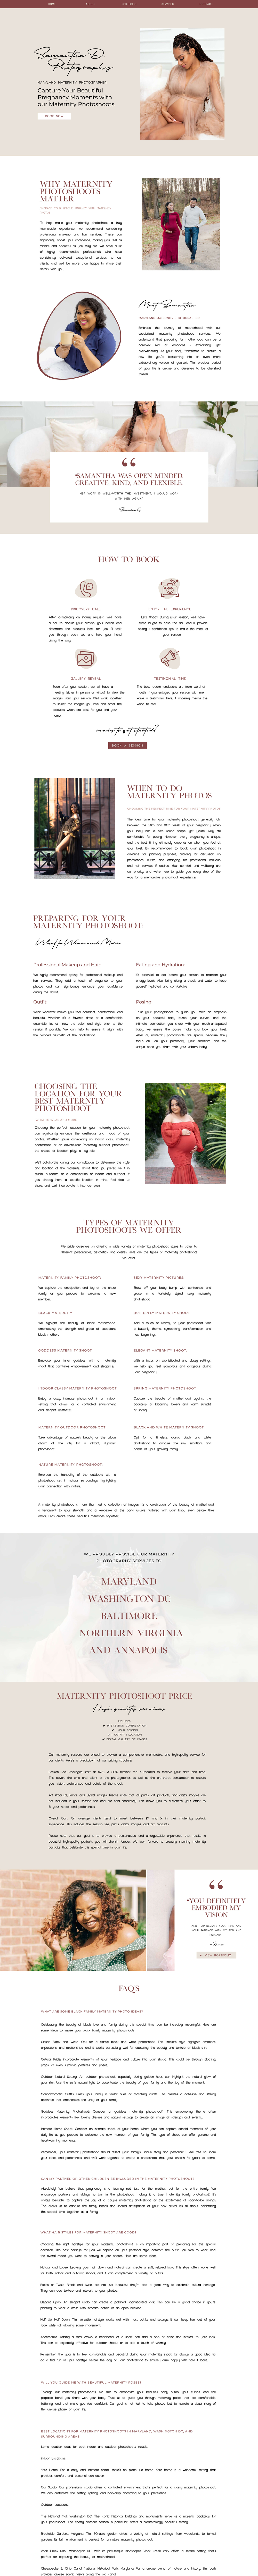 Maternity photographer Marylands Landing page